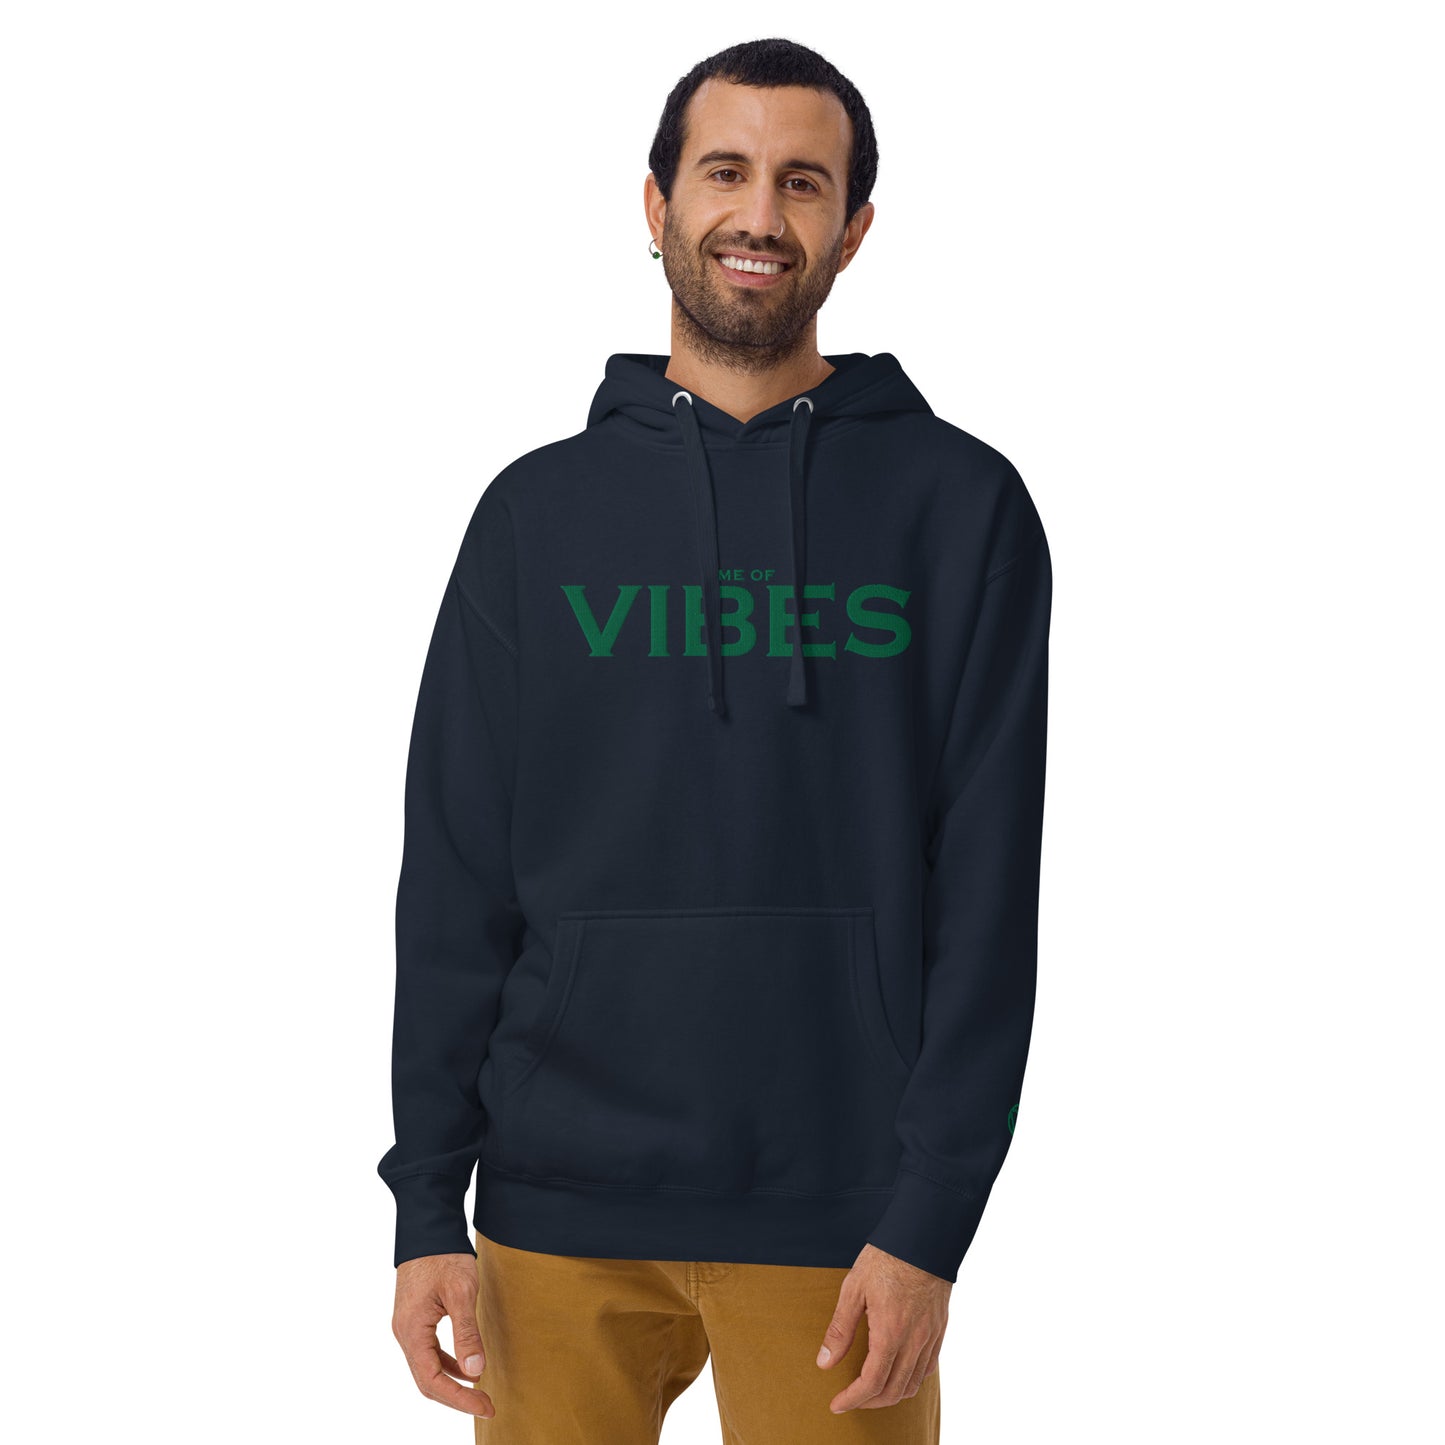 TIME OF VIBES - Classic Hoodie VIBES (Navy/Green) - €69.00